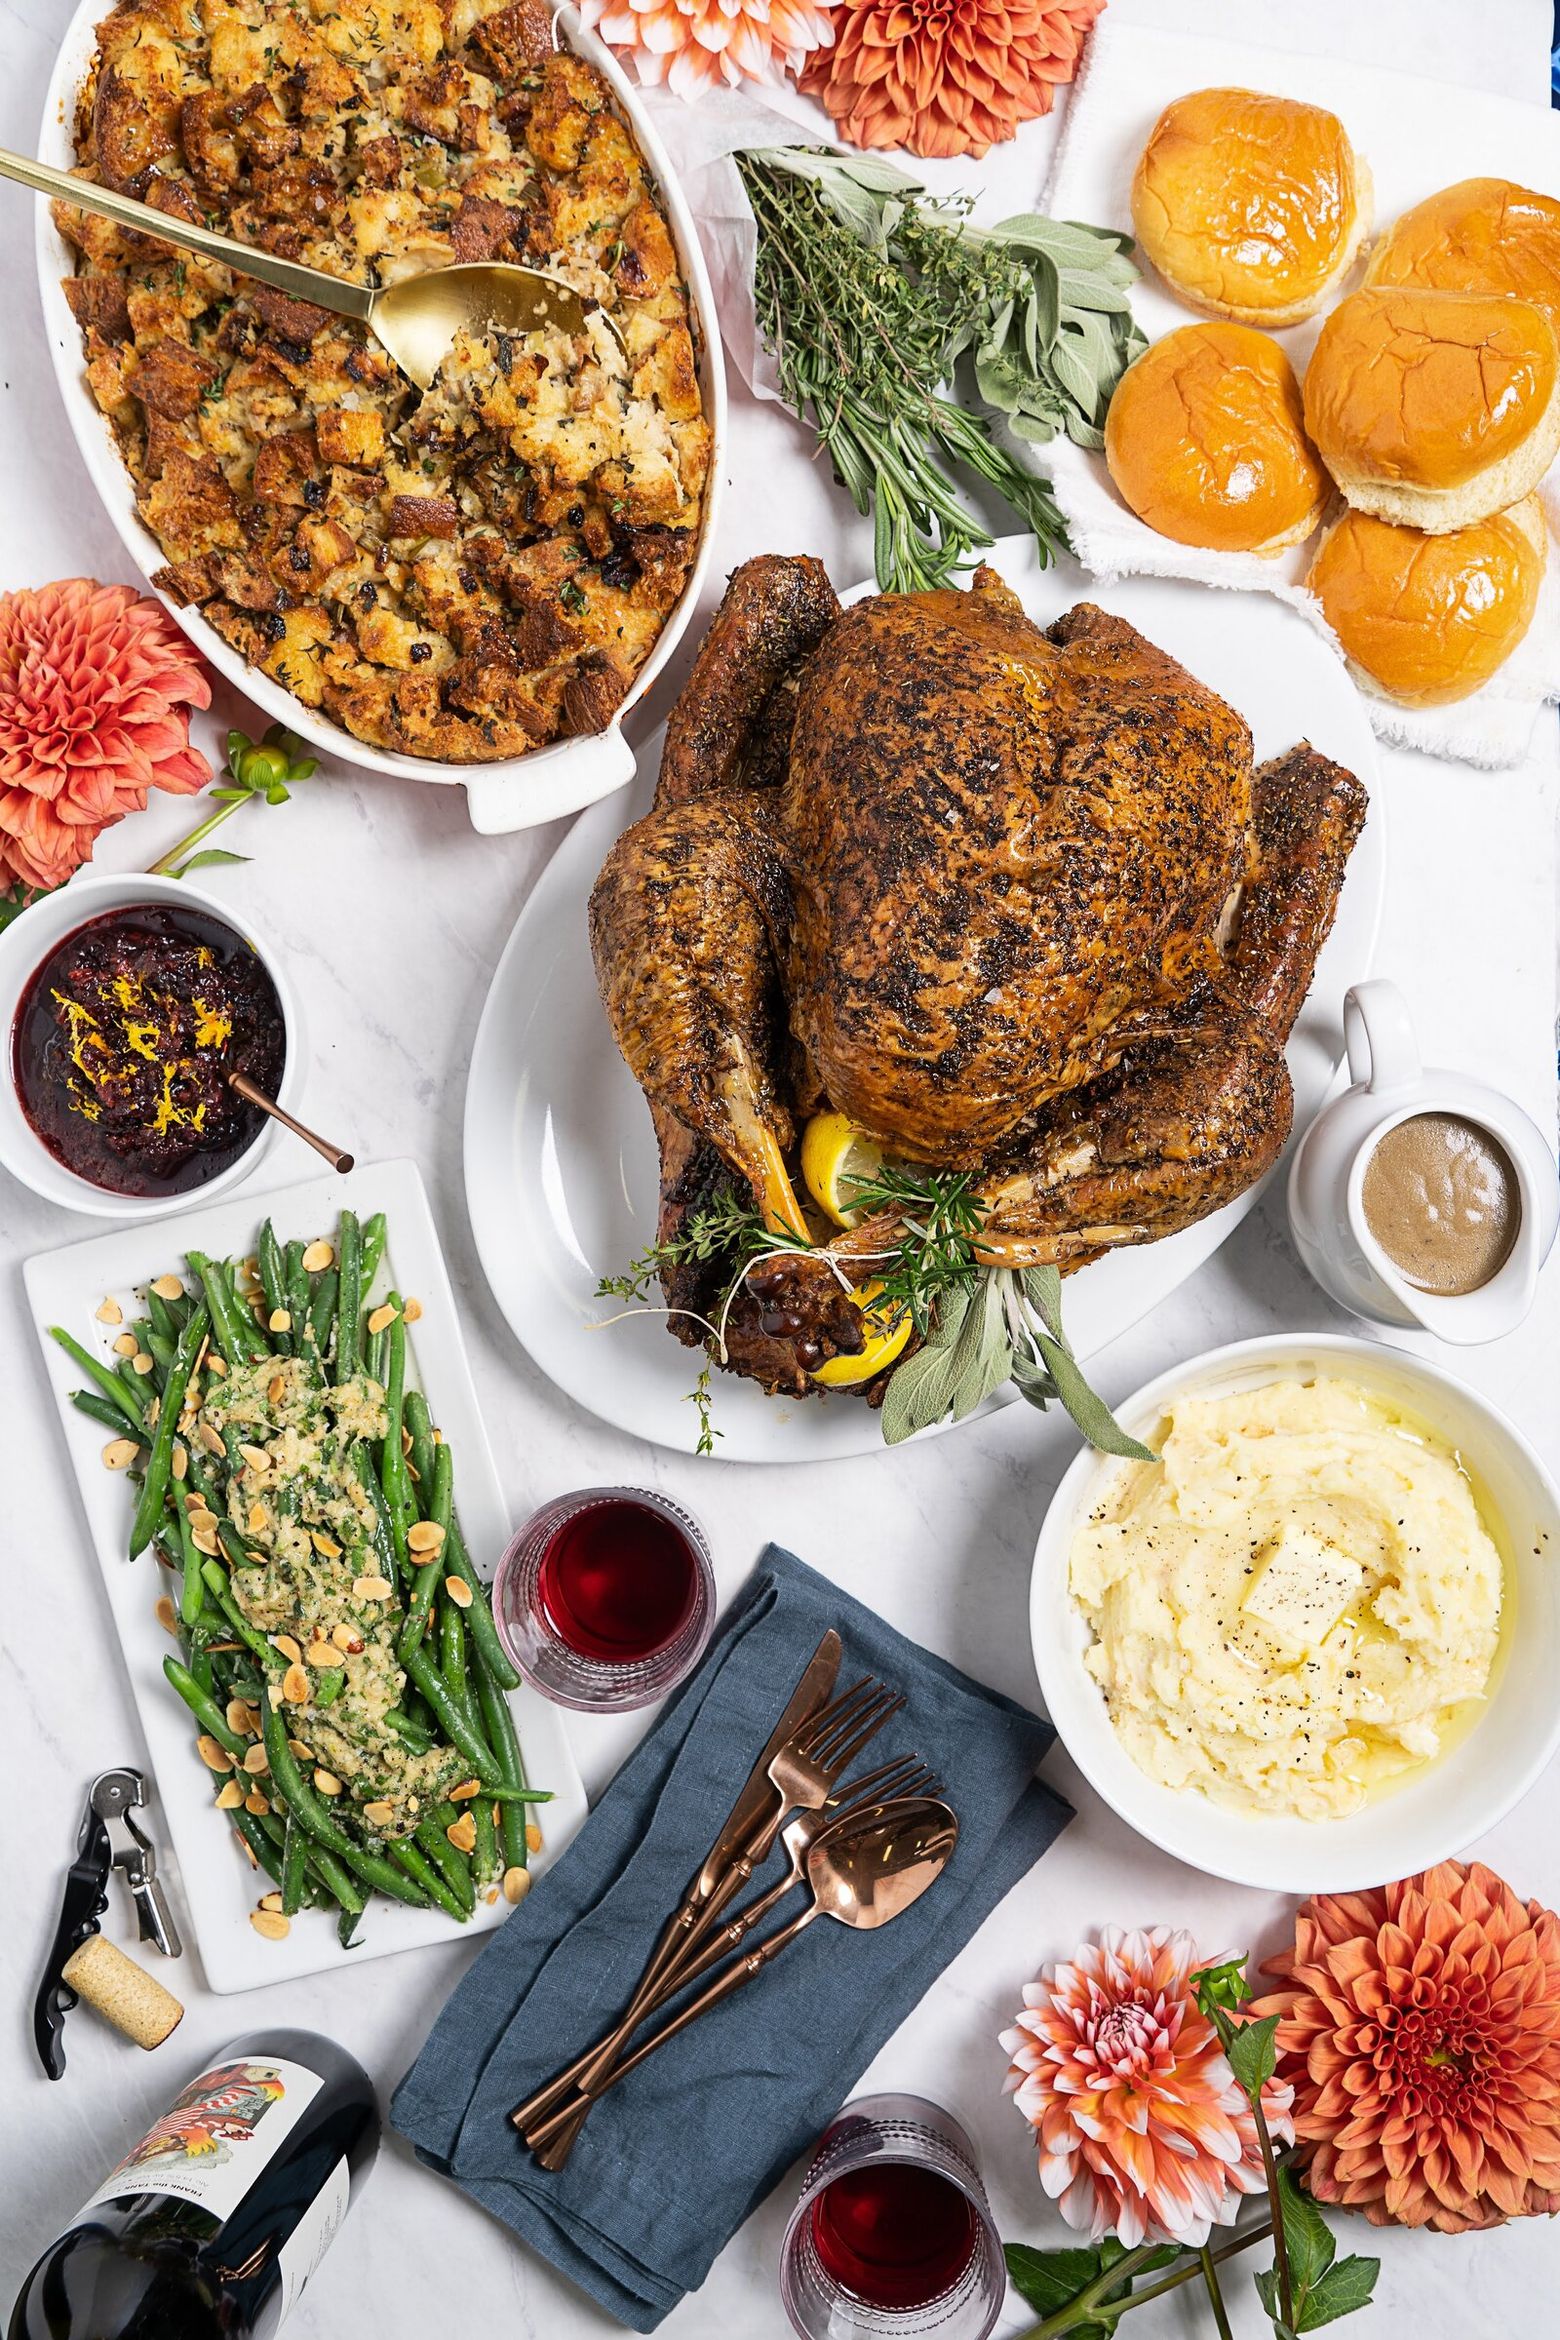 Thanksgiving dinner 2022: Breaking down the cost of some of the